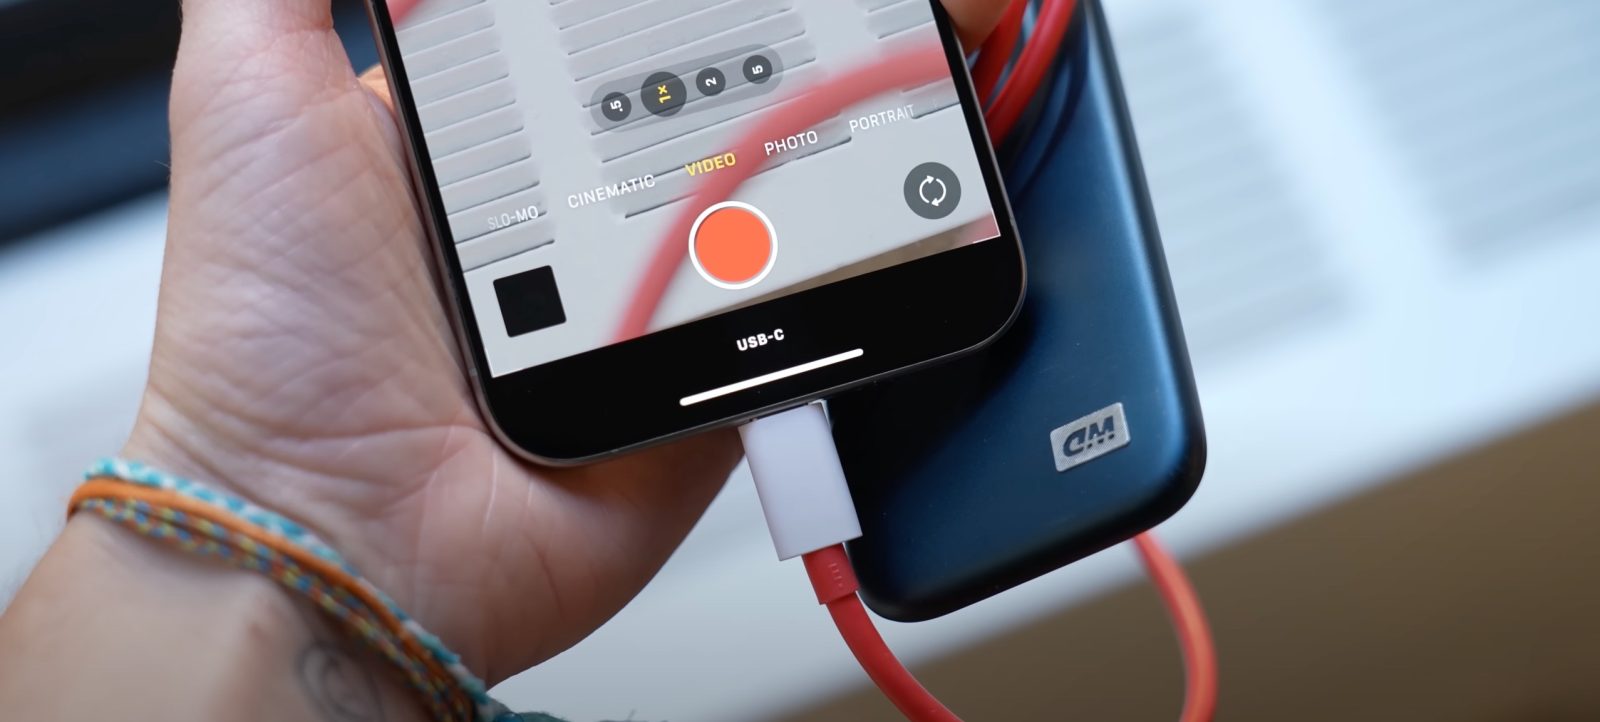 iPhone 15 Pro video direct to an SSD shows a USB-C indicator